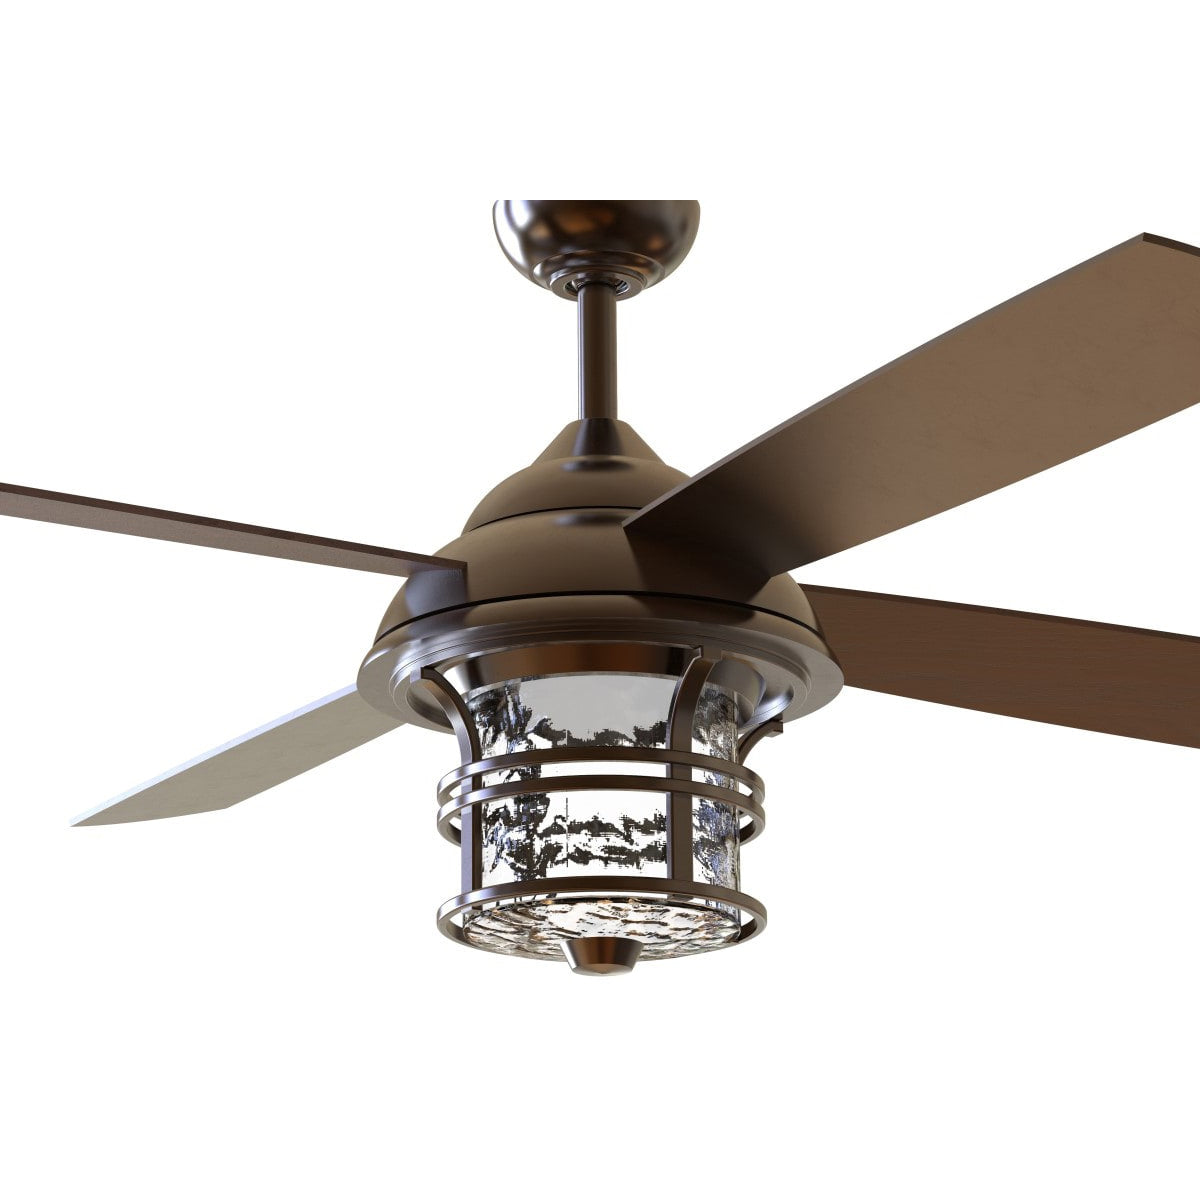 CYD56OB4 - Courtyard 56" 4 Blade Indoor / Outdoor Ceiling Fan with Light Kit - Remote & Wall Control